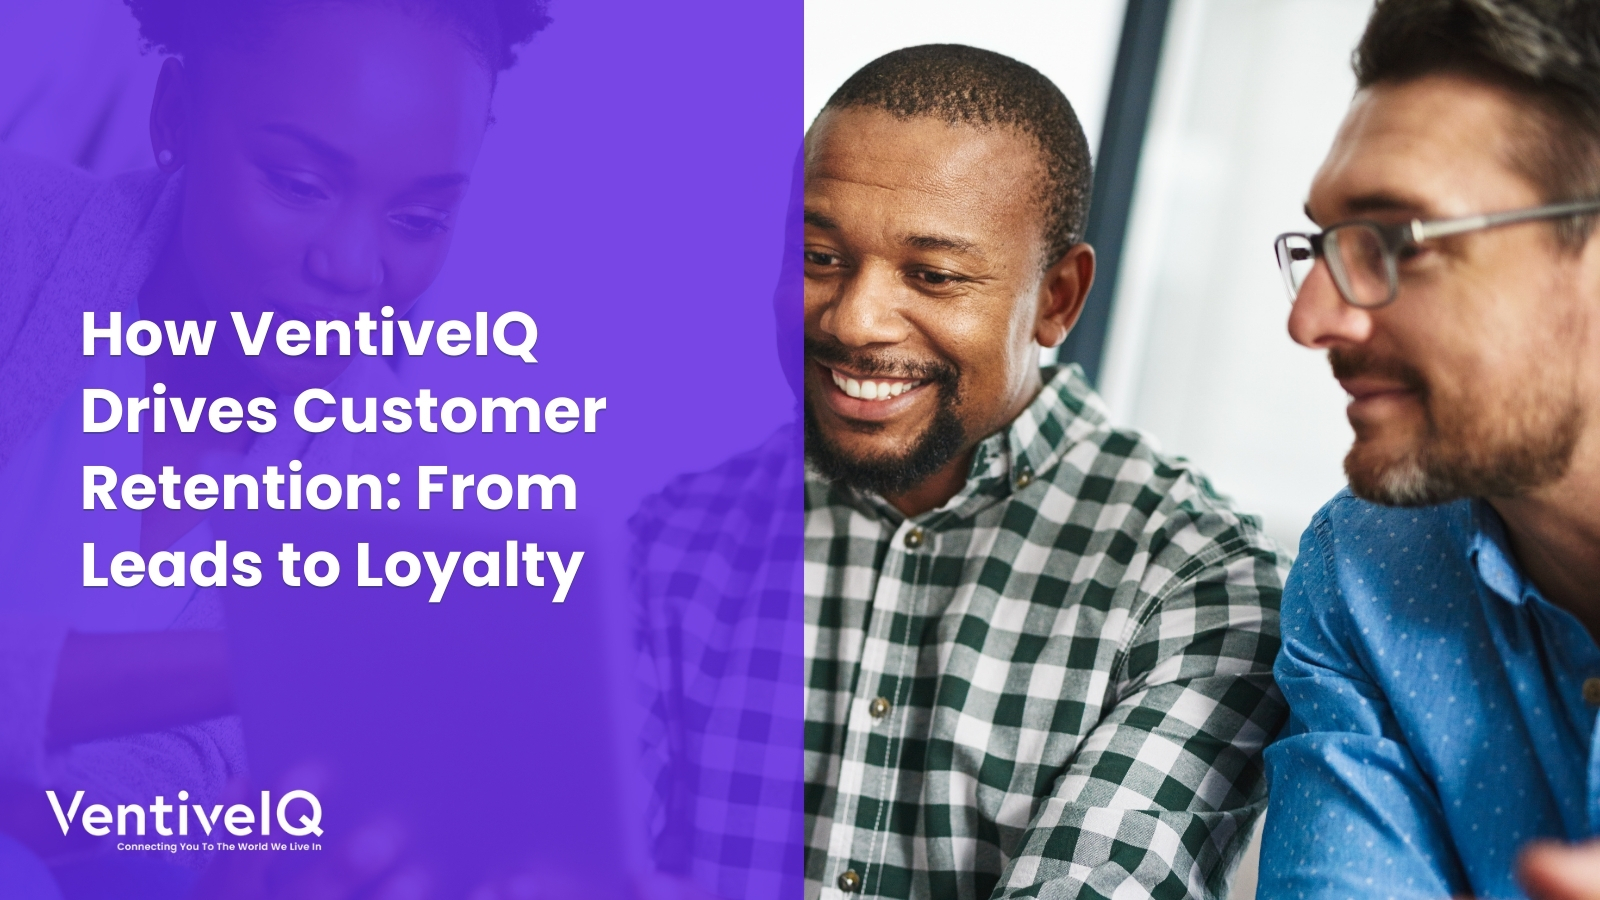 How VentiveIQ Drives Customer Retention: From Leads to Loyalty